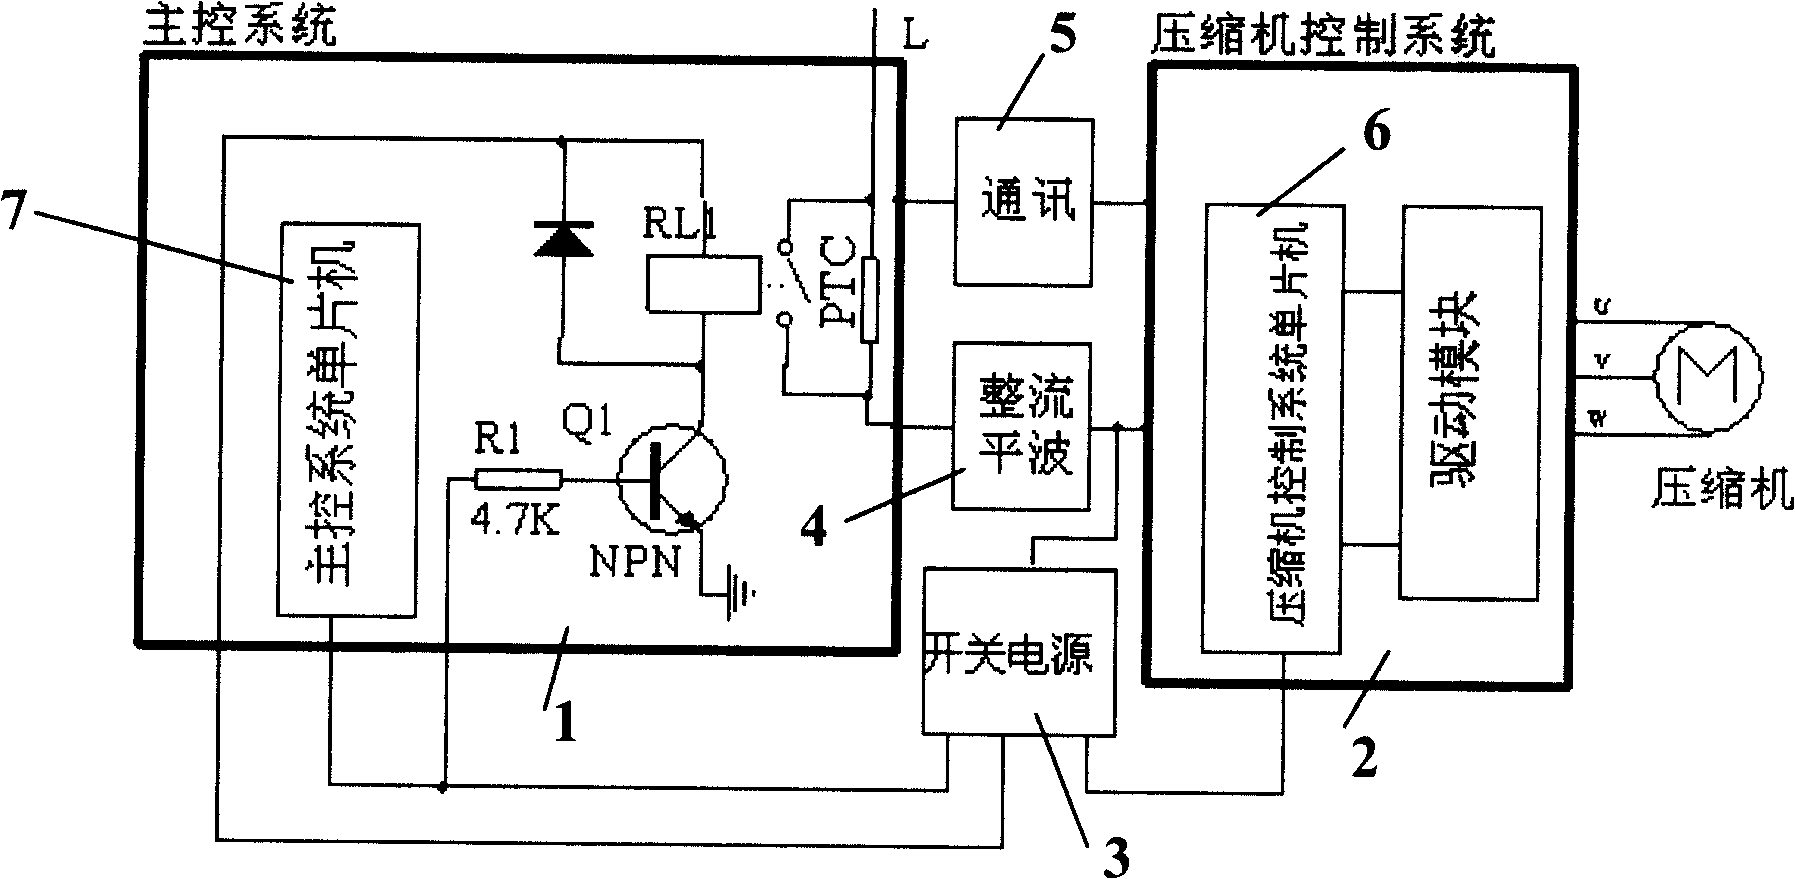 Circuit for preventing powered on moment impact in frequency converting air conditioner